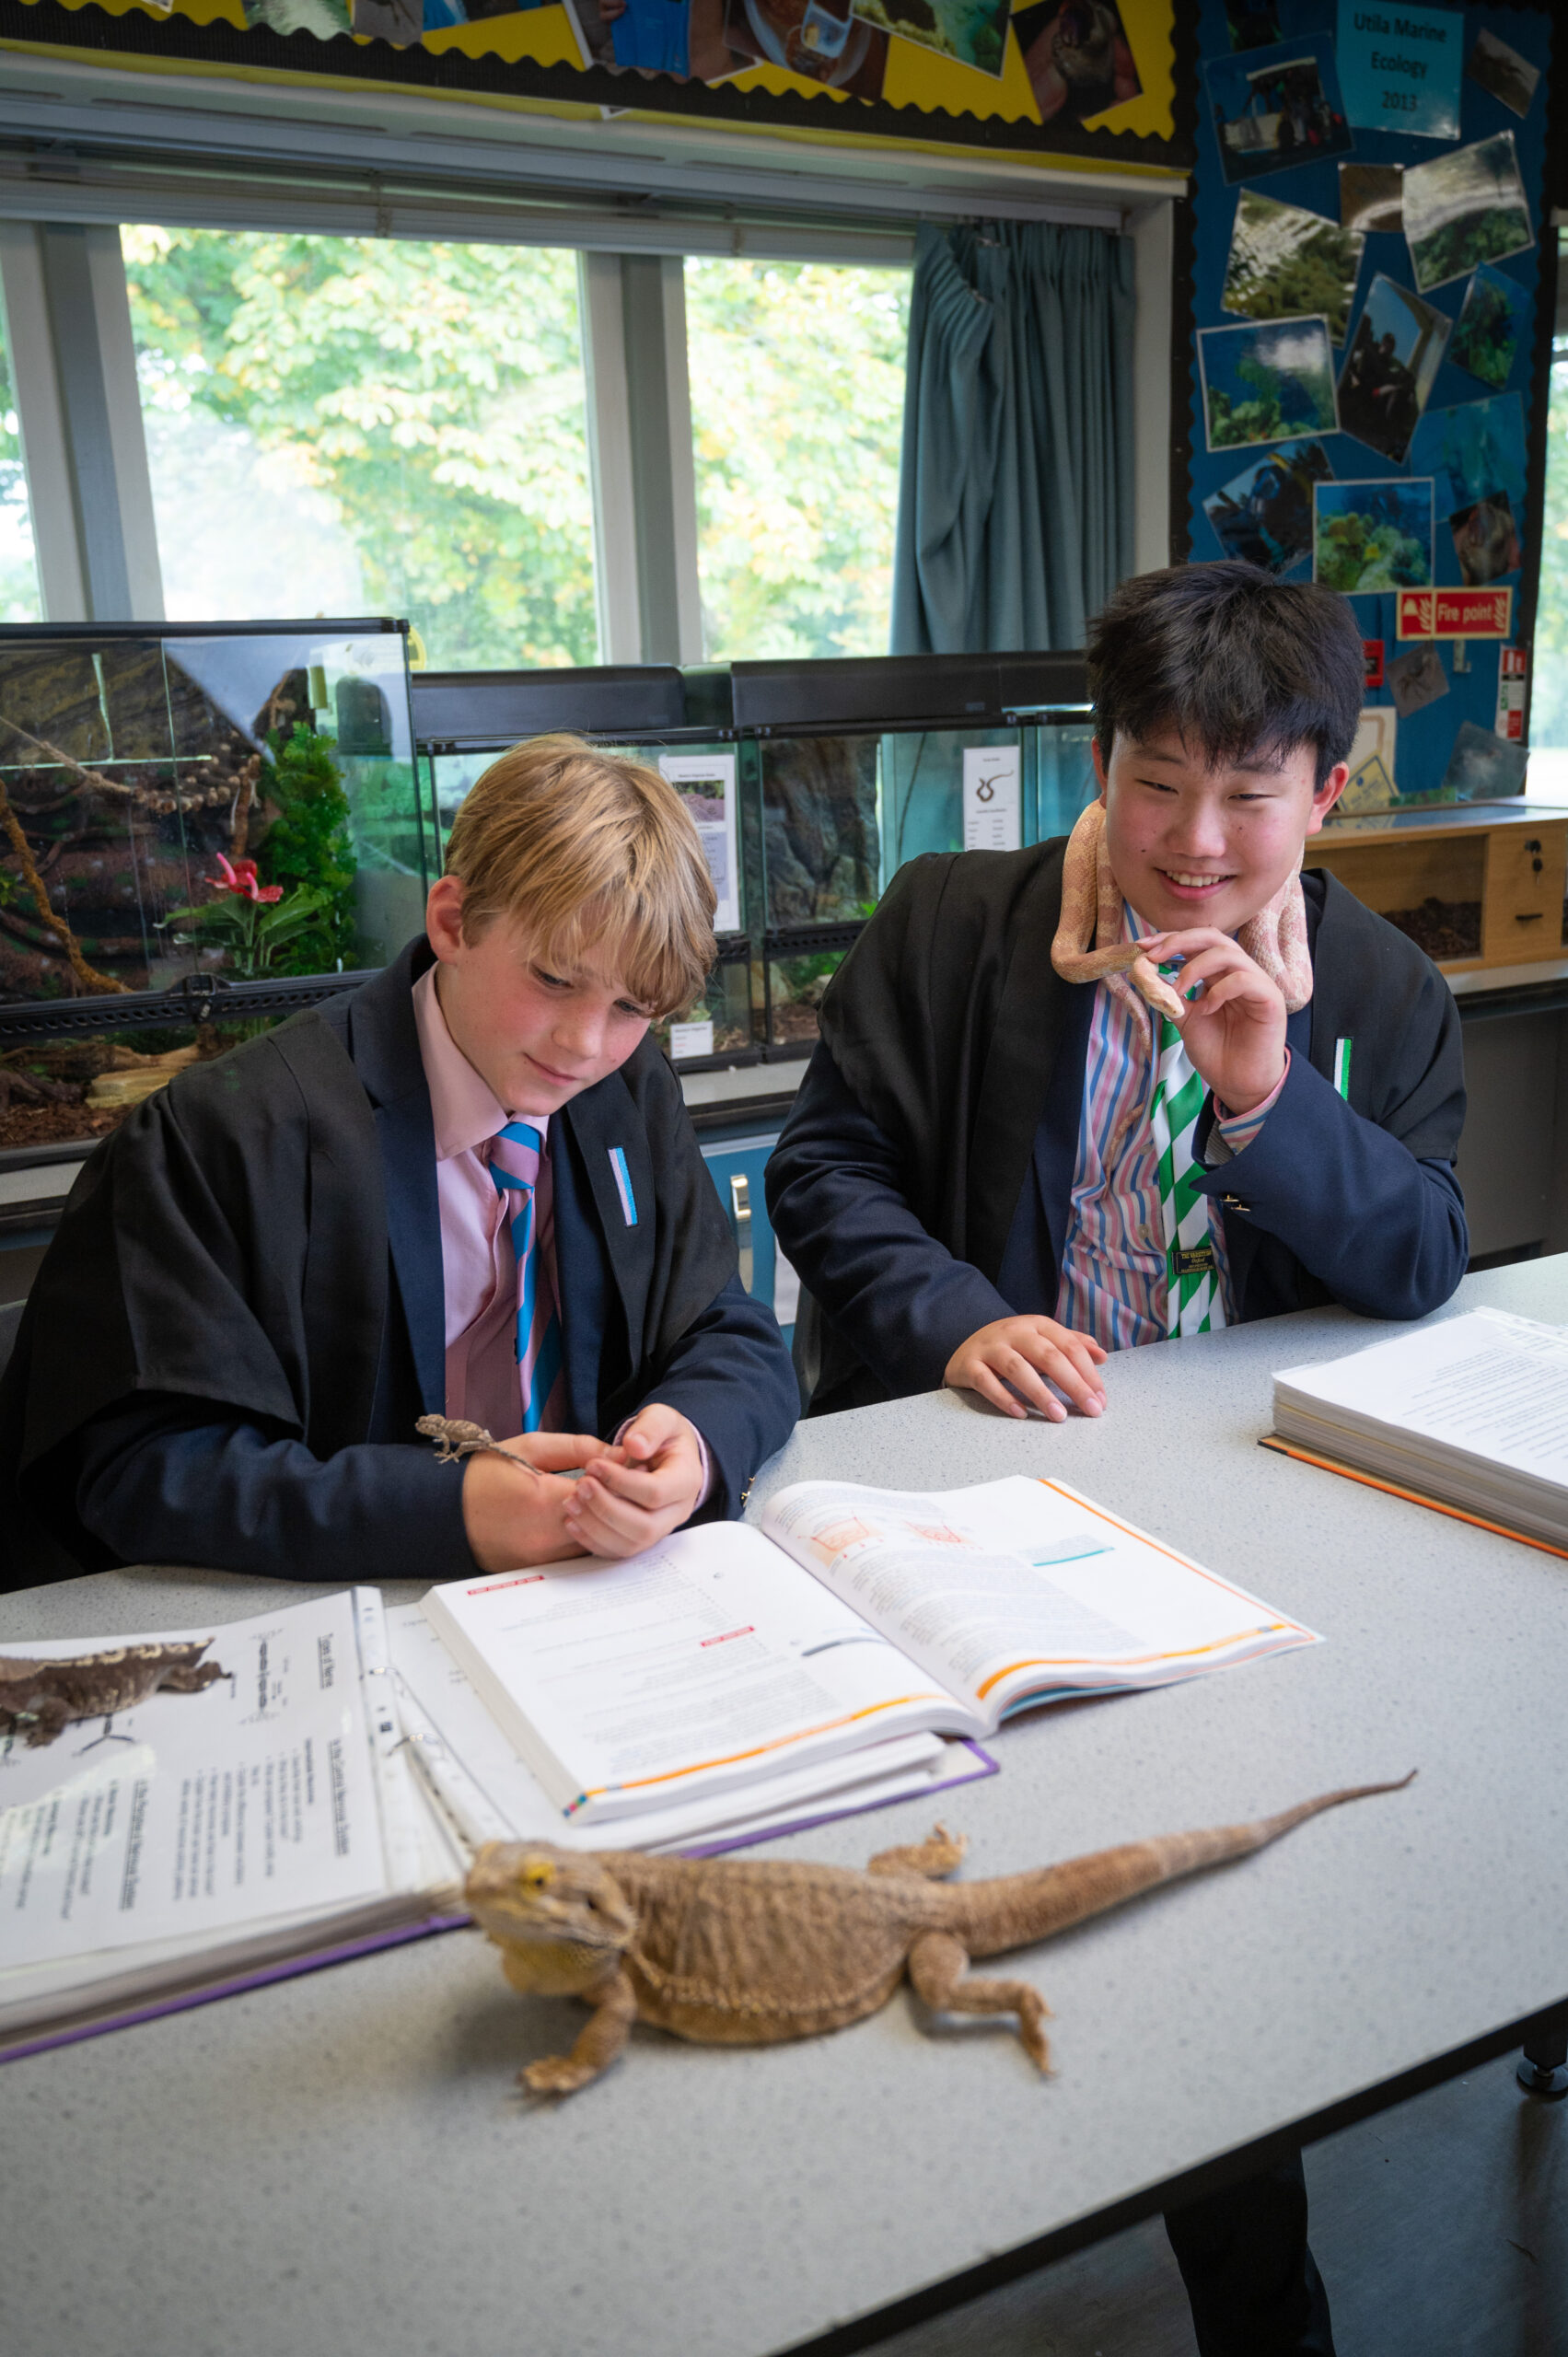 Two boys in a classroom with snakes and lizards on their desk